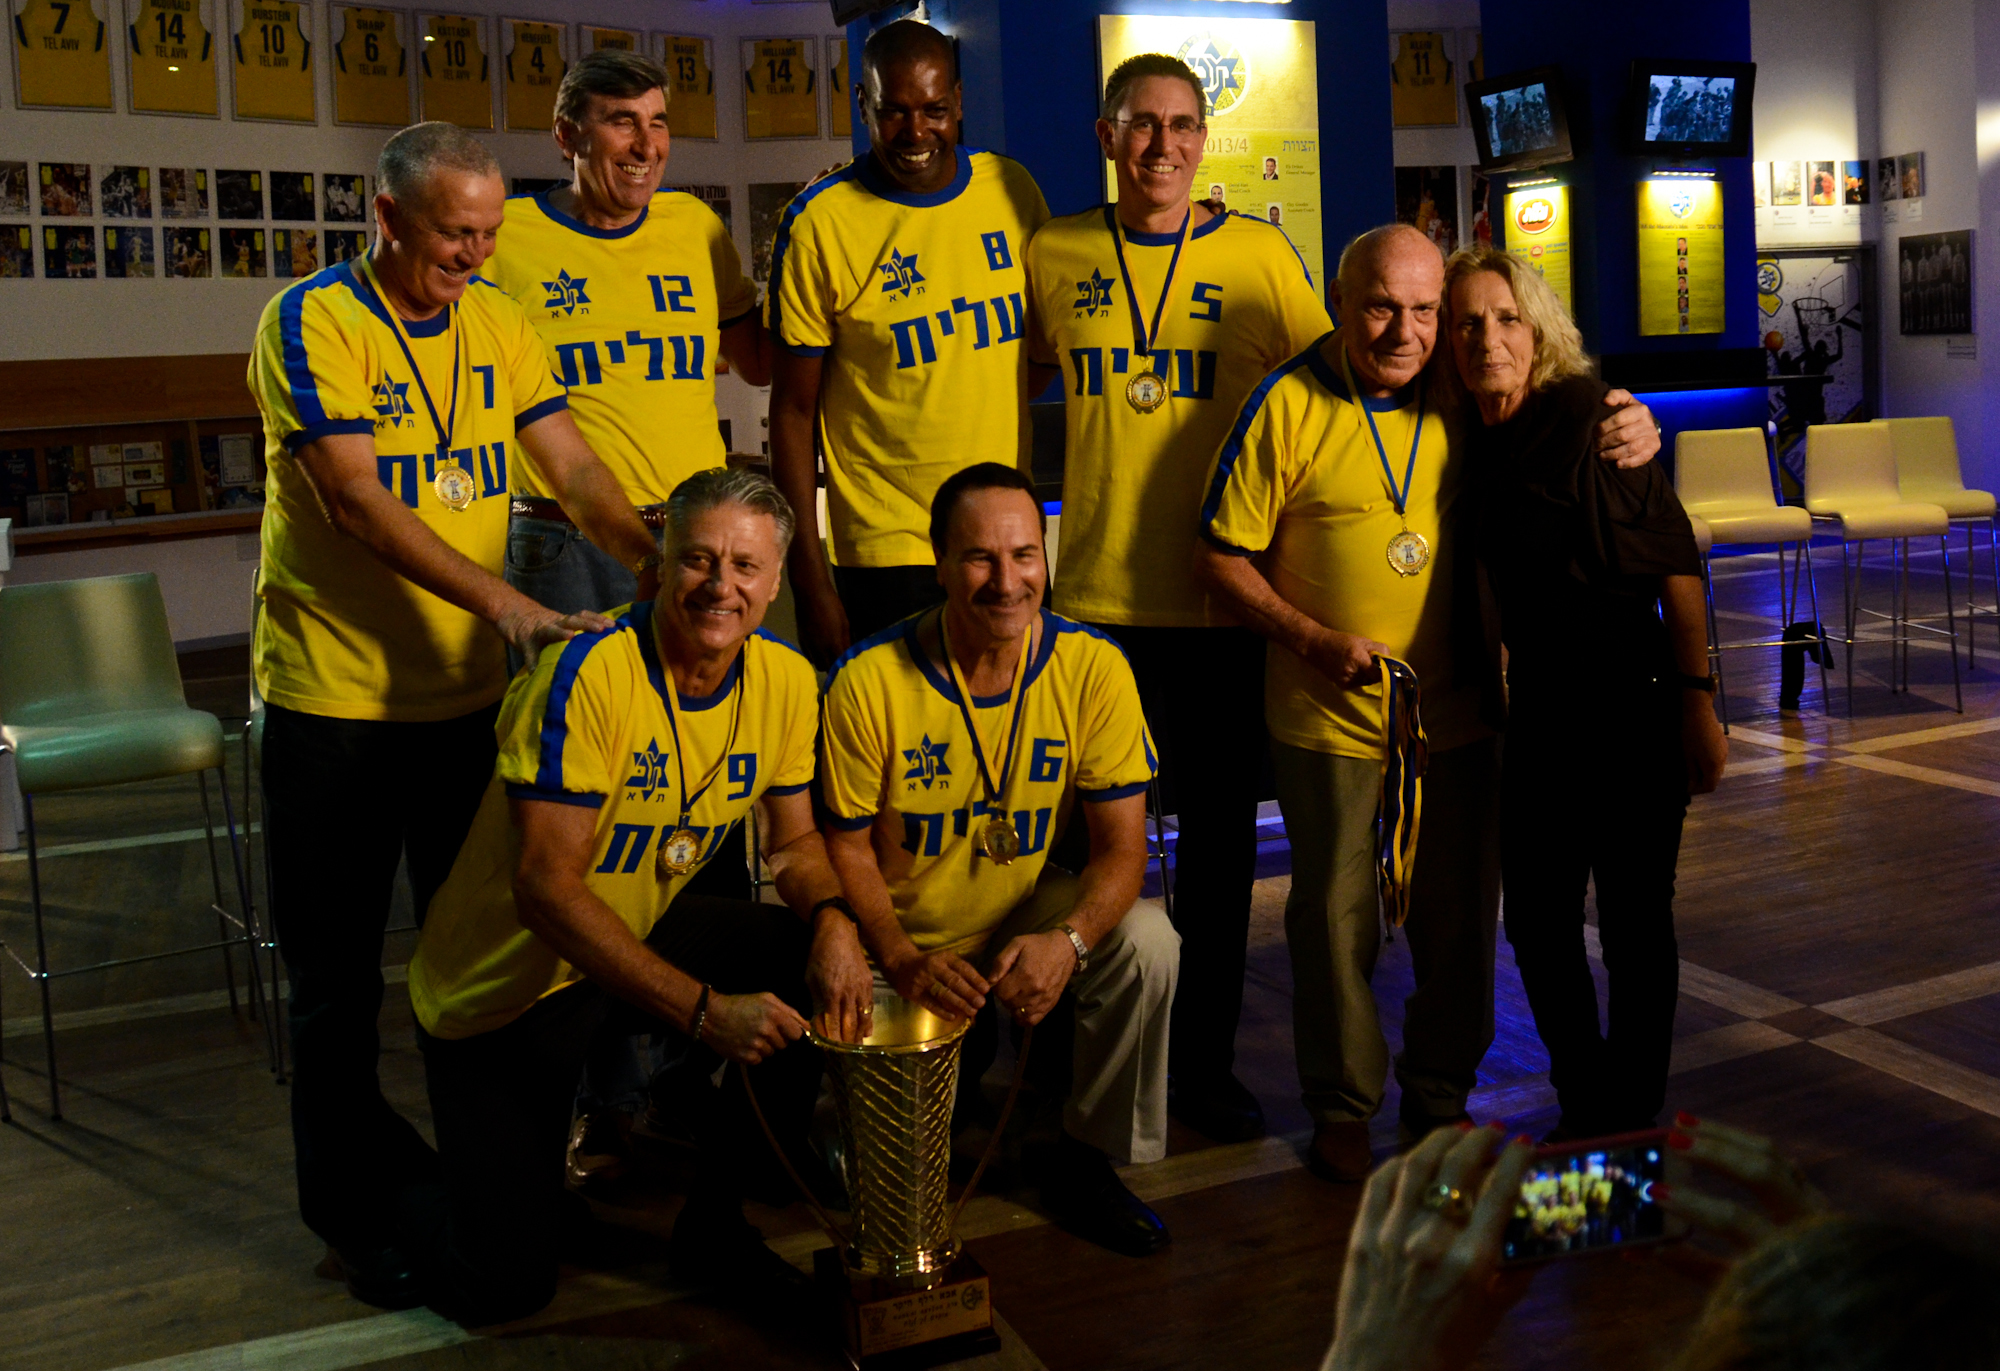 Members of the 1977 Maccabi Tel Aviv team reunited to be interviewed for the film.